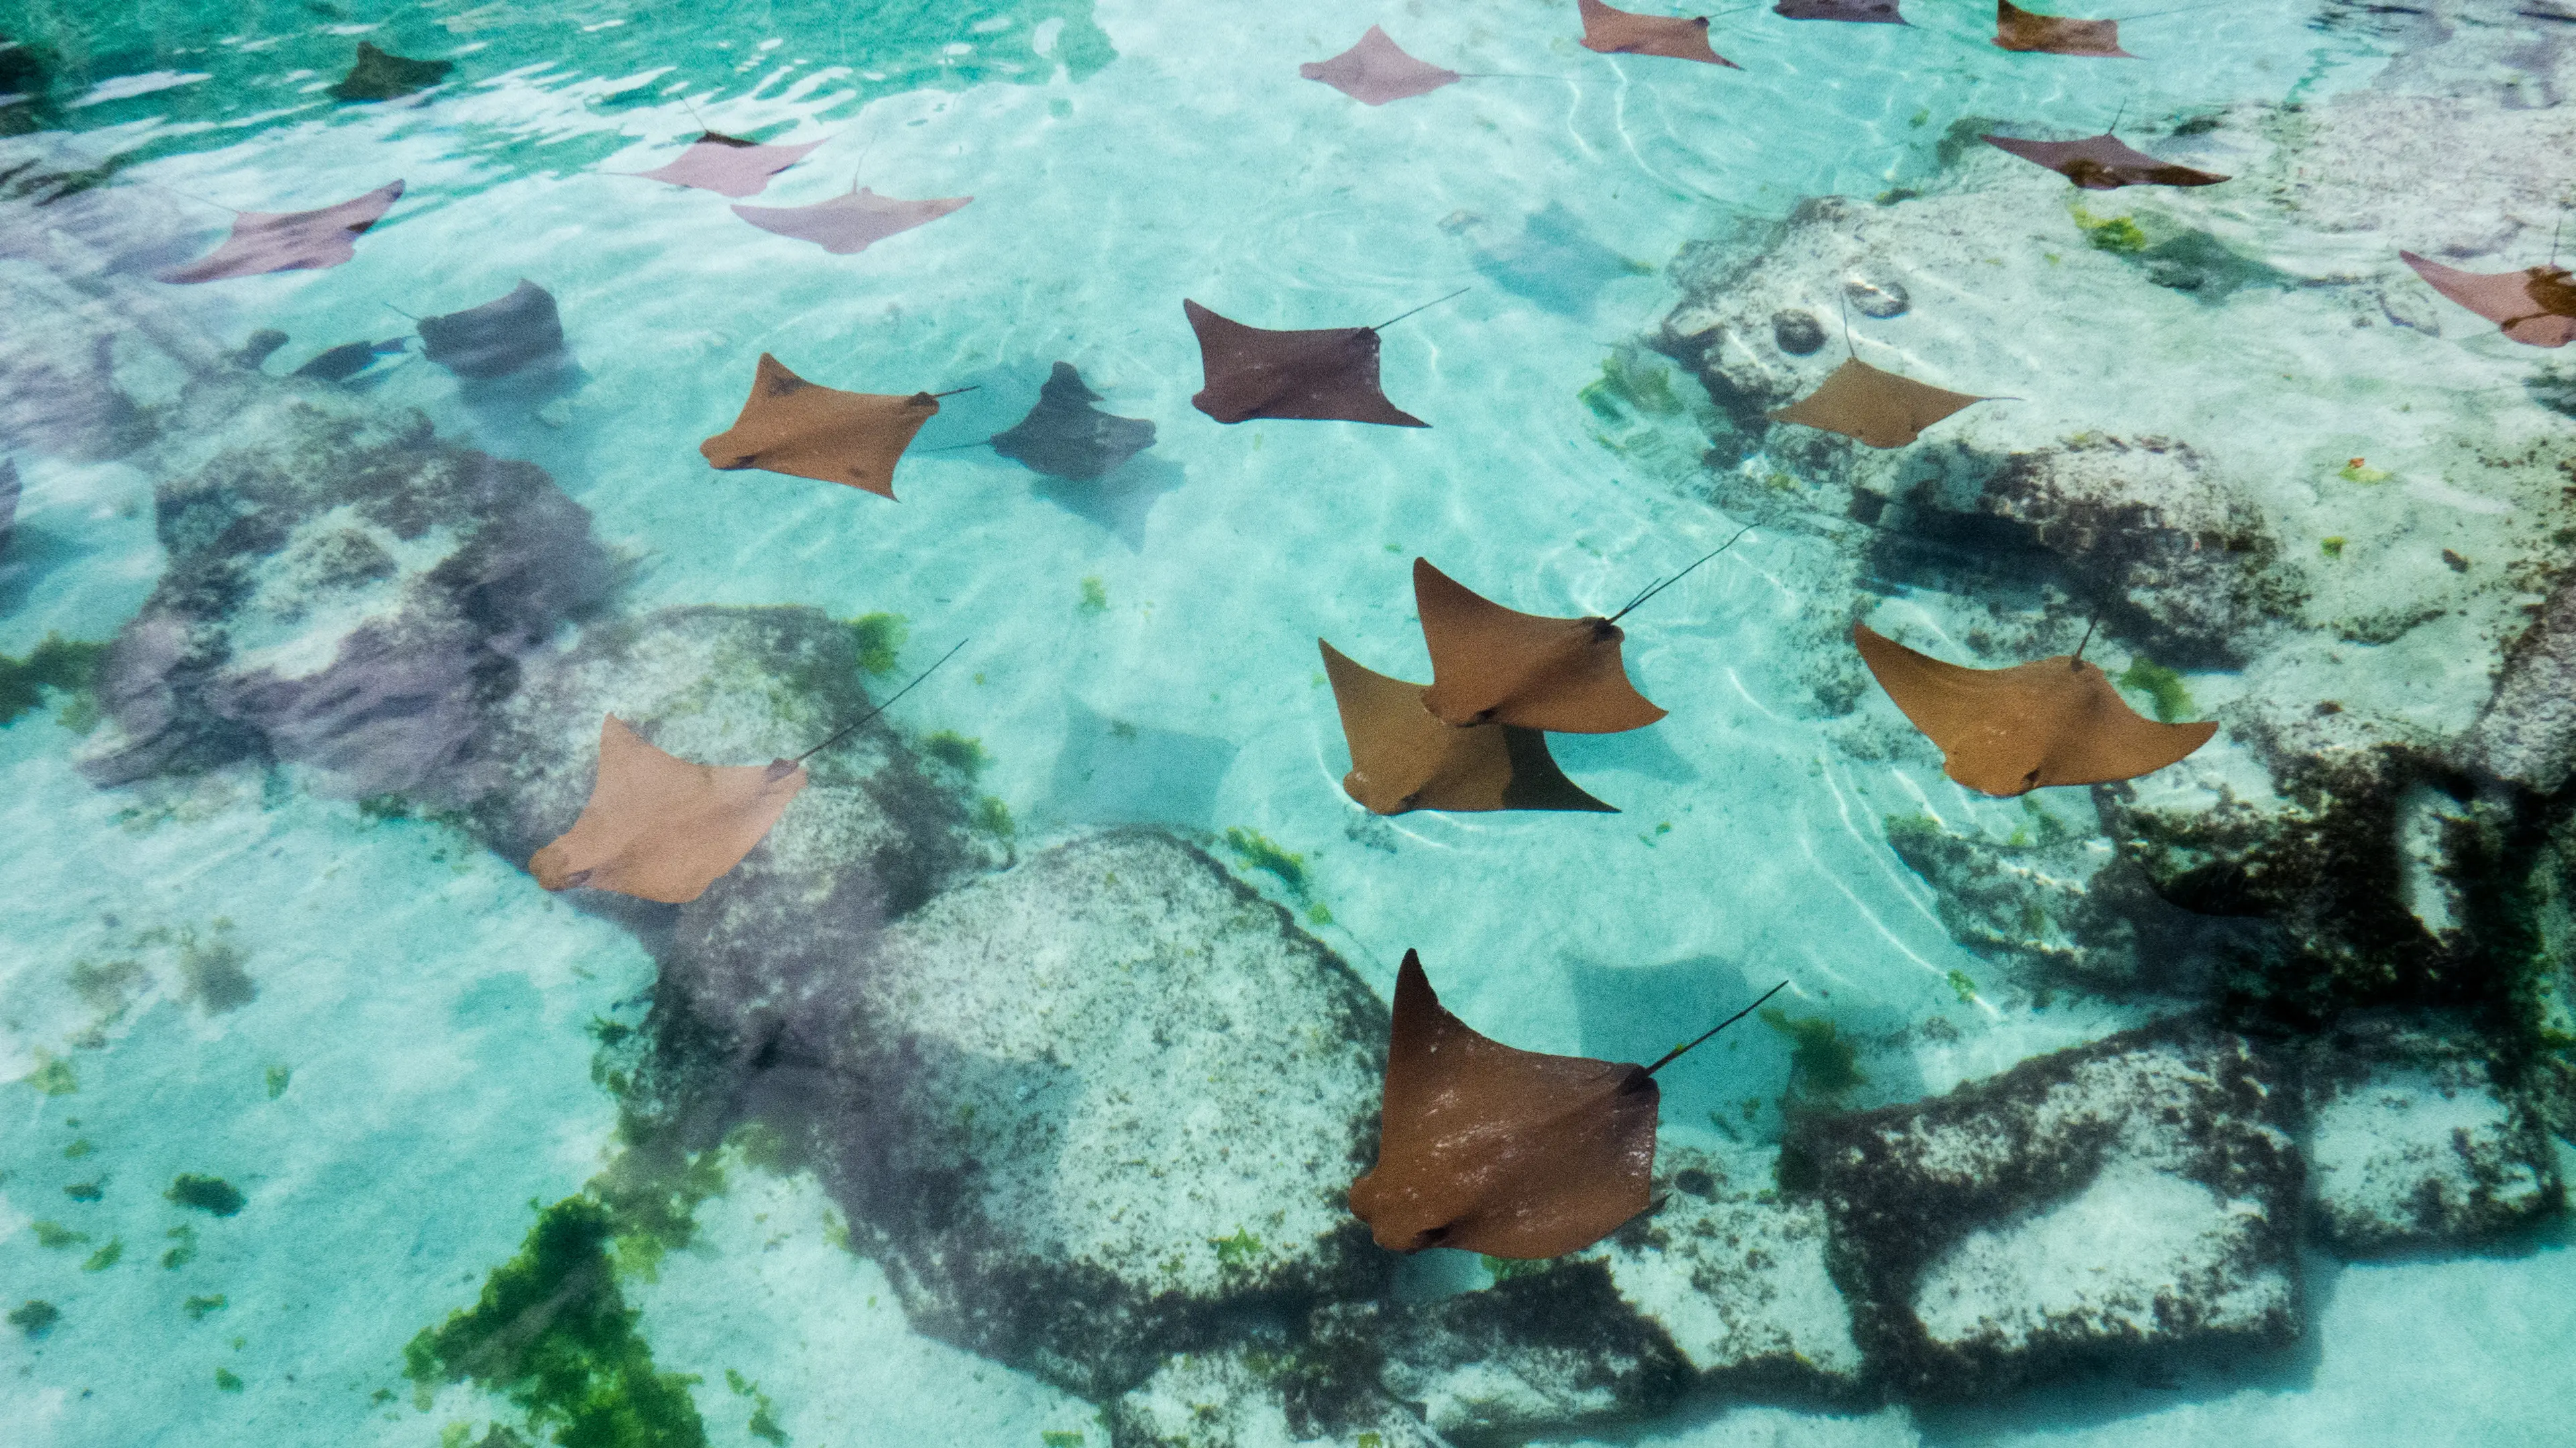 A fever of stingrays swimming